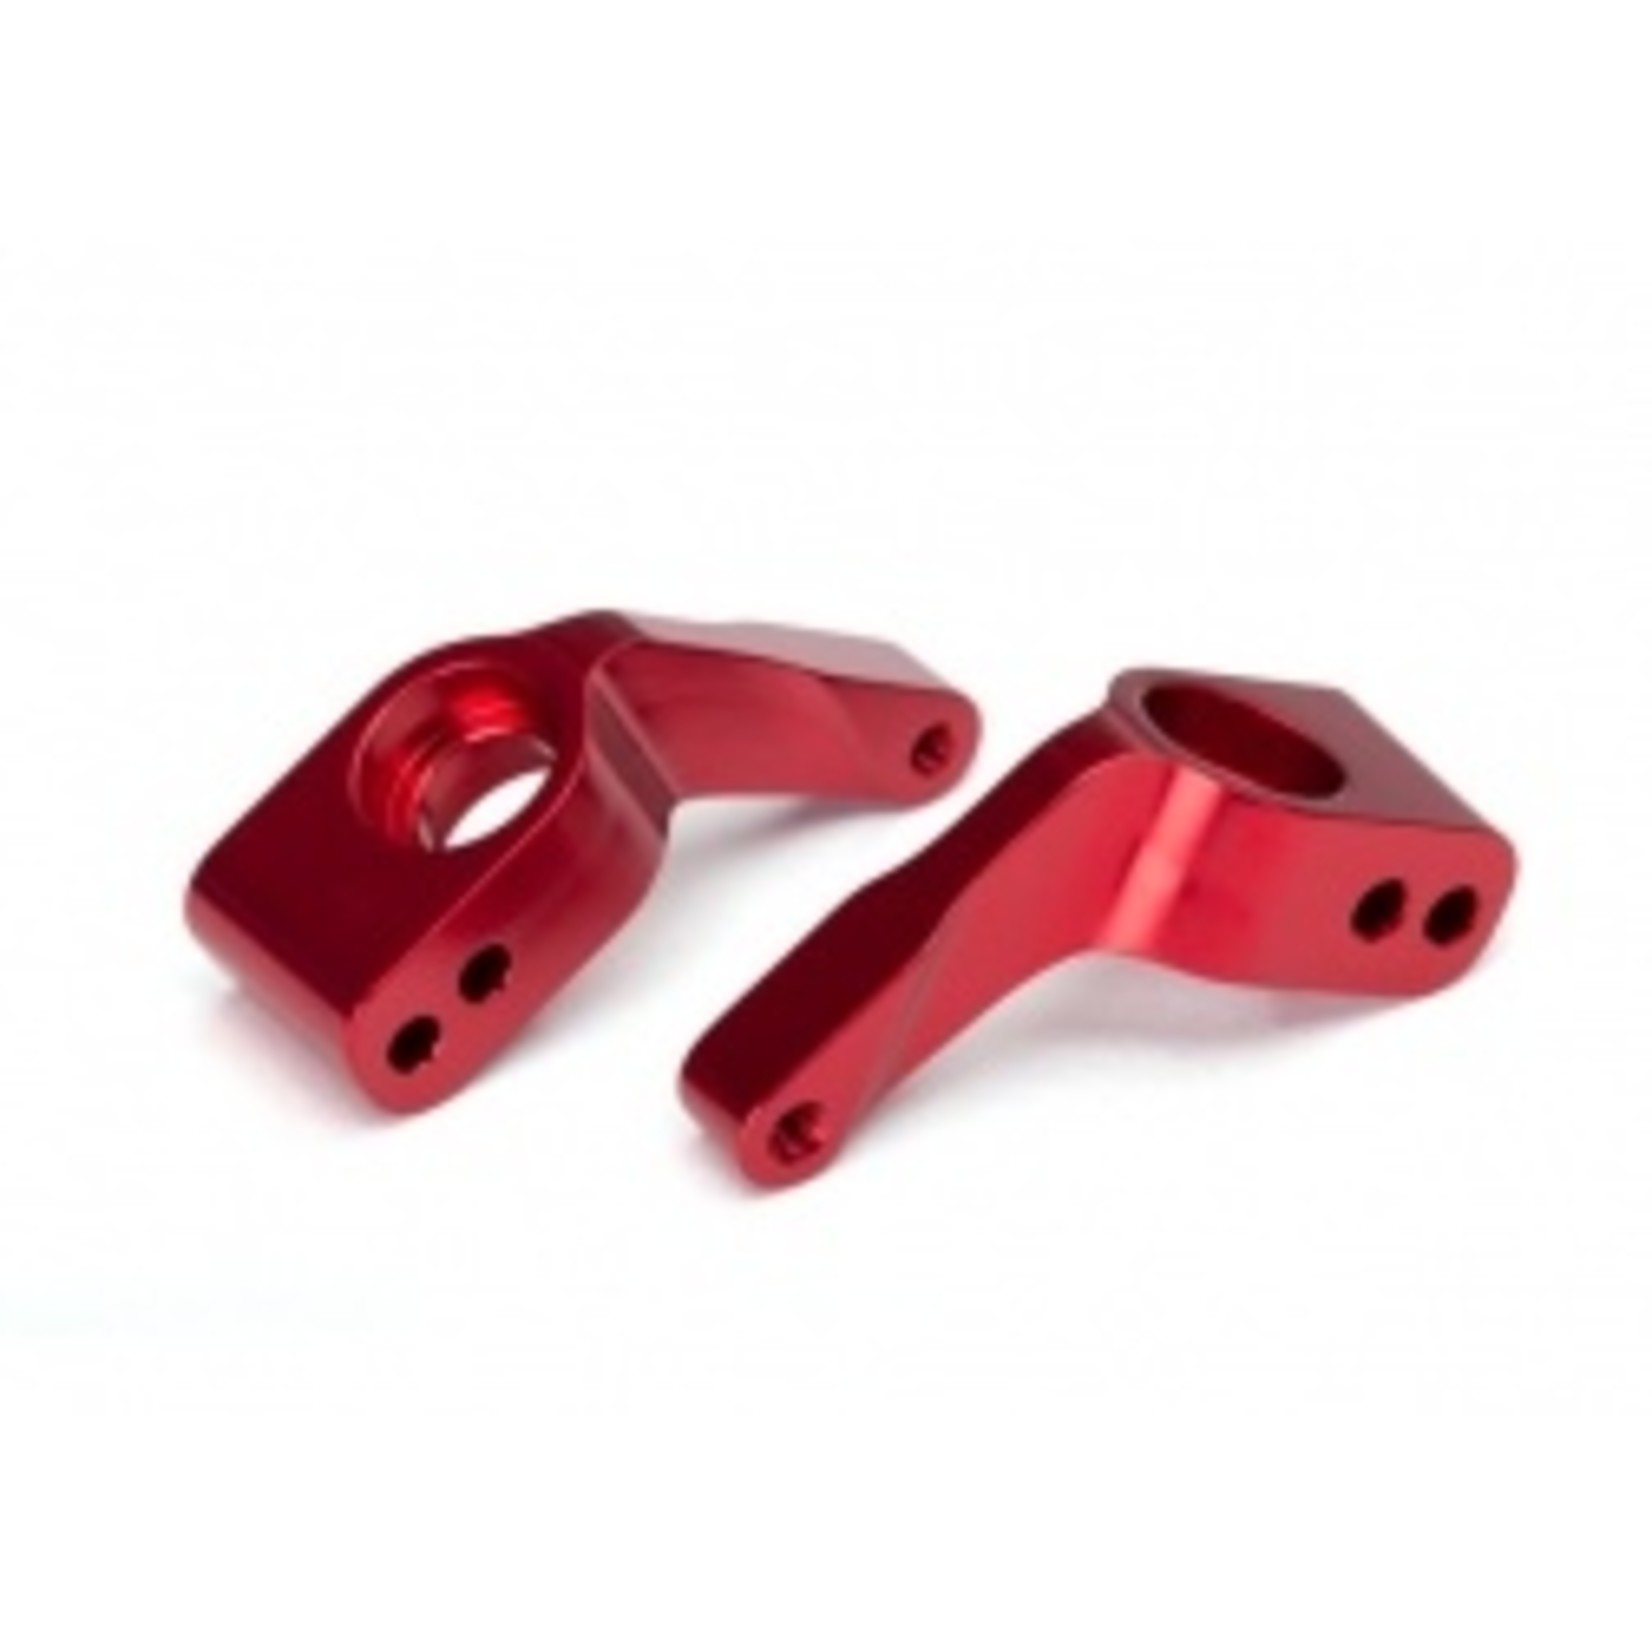 Traxxas 3652X Stub axle carriers, Rustler®/Stampede®/Bandit® (2), 6061-T6 aluminum (red-anodized)/ 5x11mm ball bearings (4)